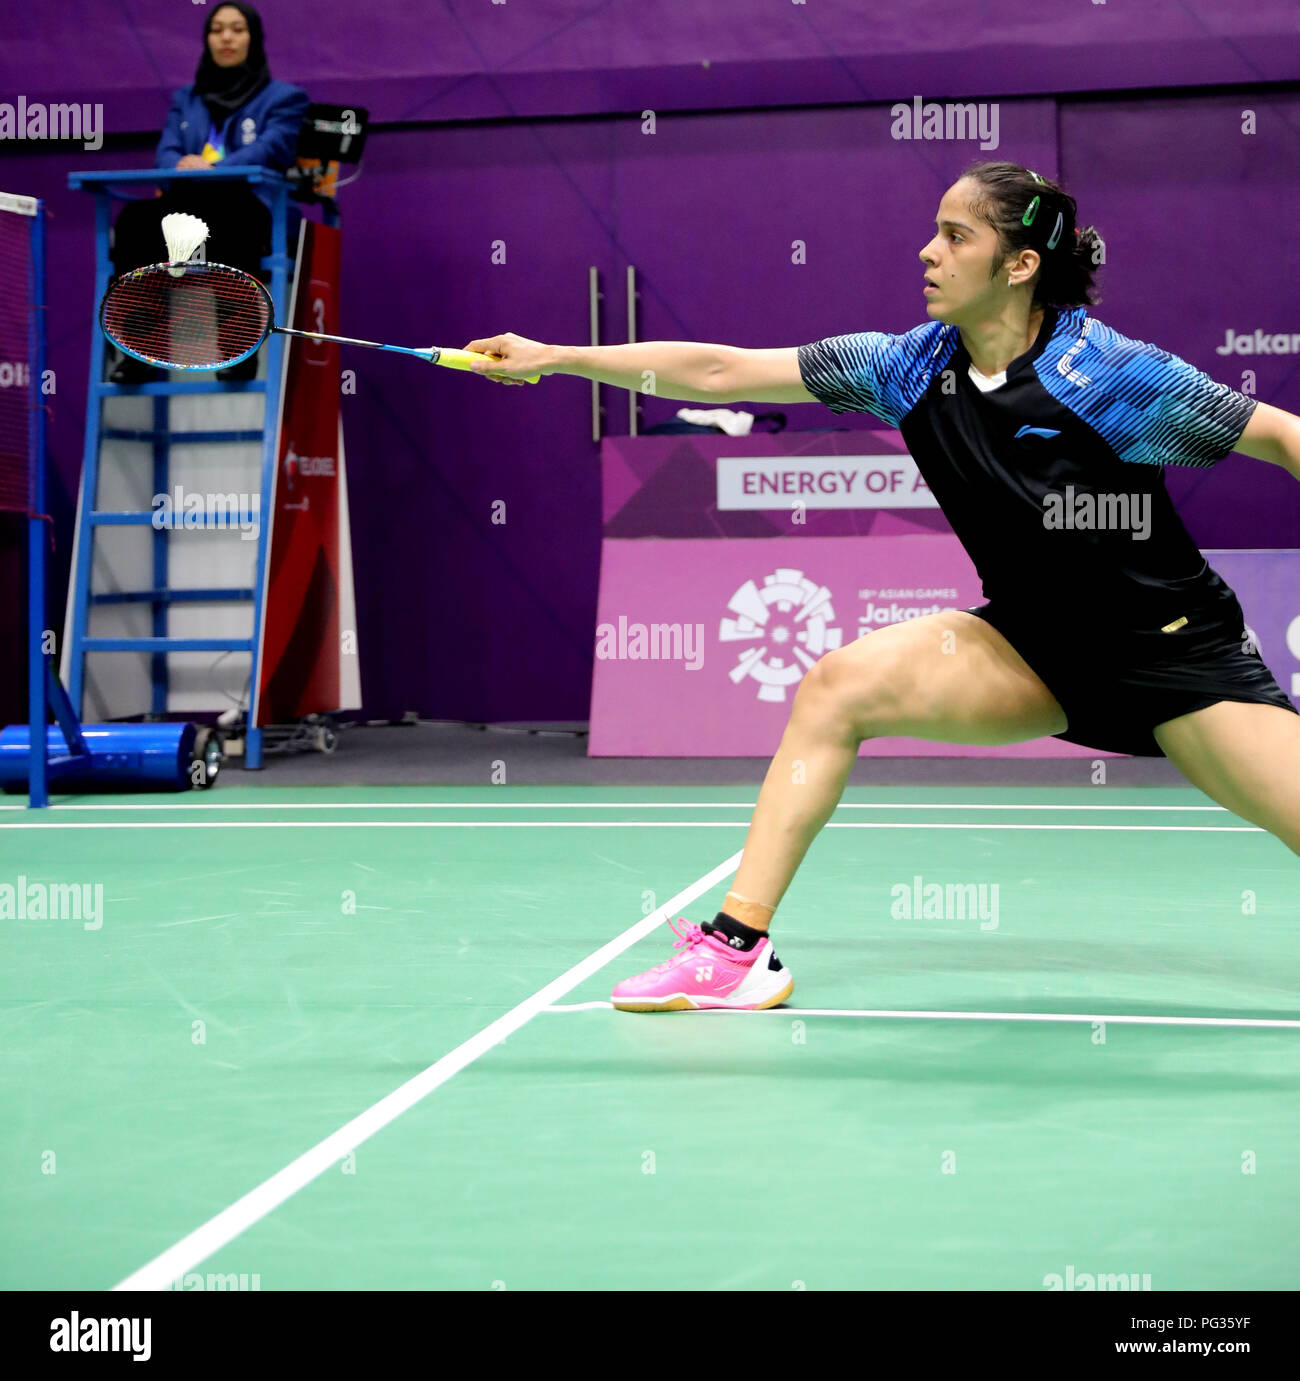 Jakarta, Indonesia, 23rd Aug 2018 Badminton Indias Star Shuttler Saina Nehwal in action who defeated her